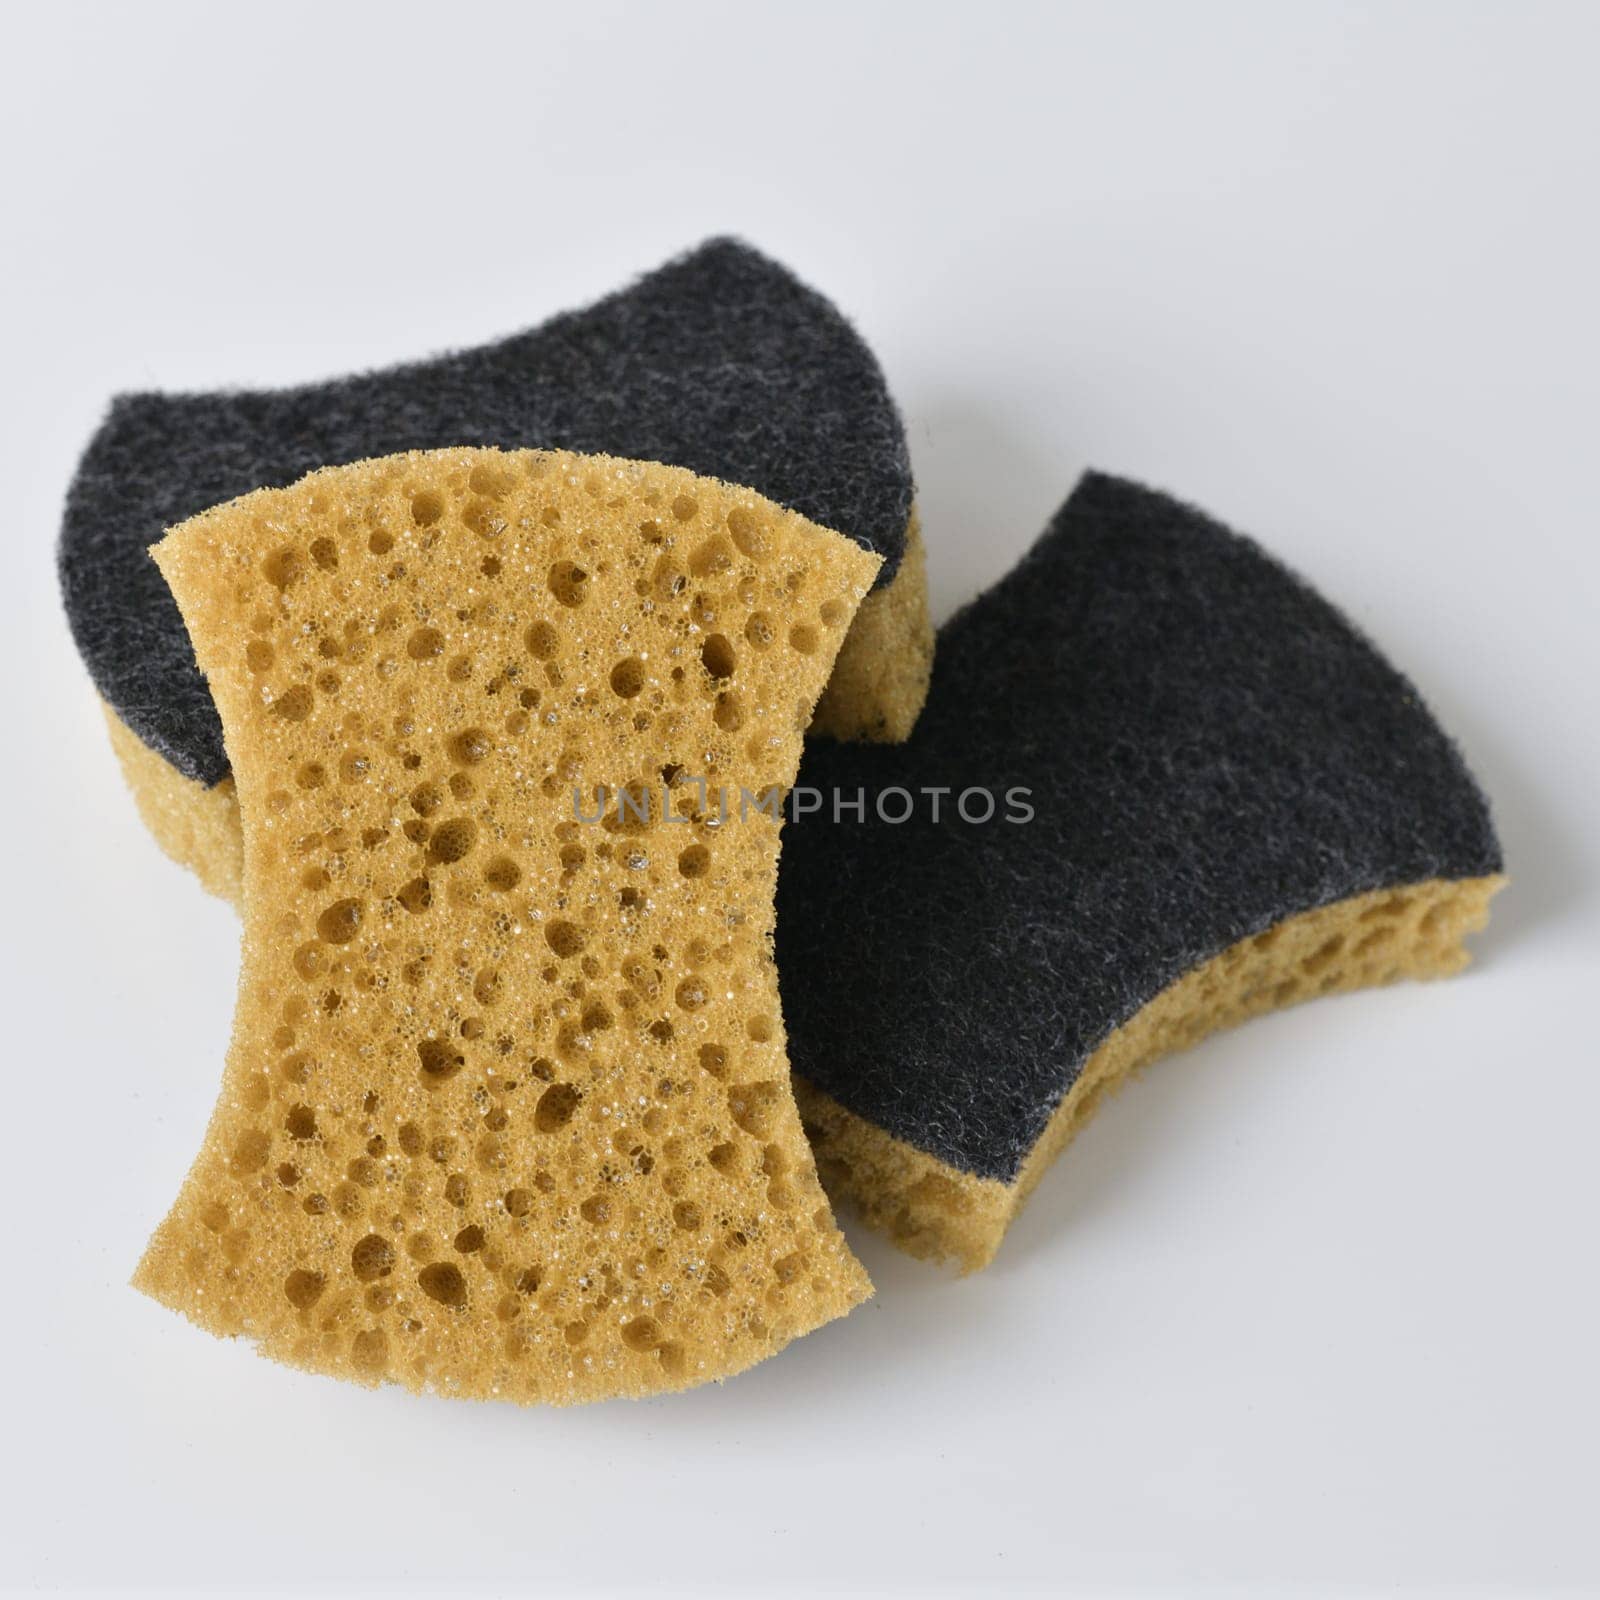 Foam sponges for washing dishes on a white background